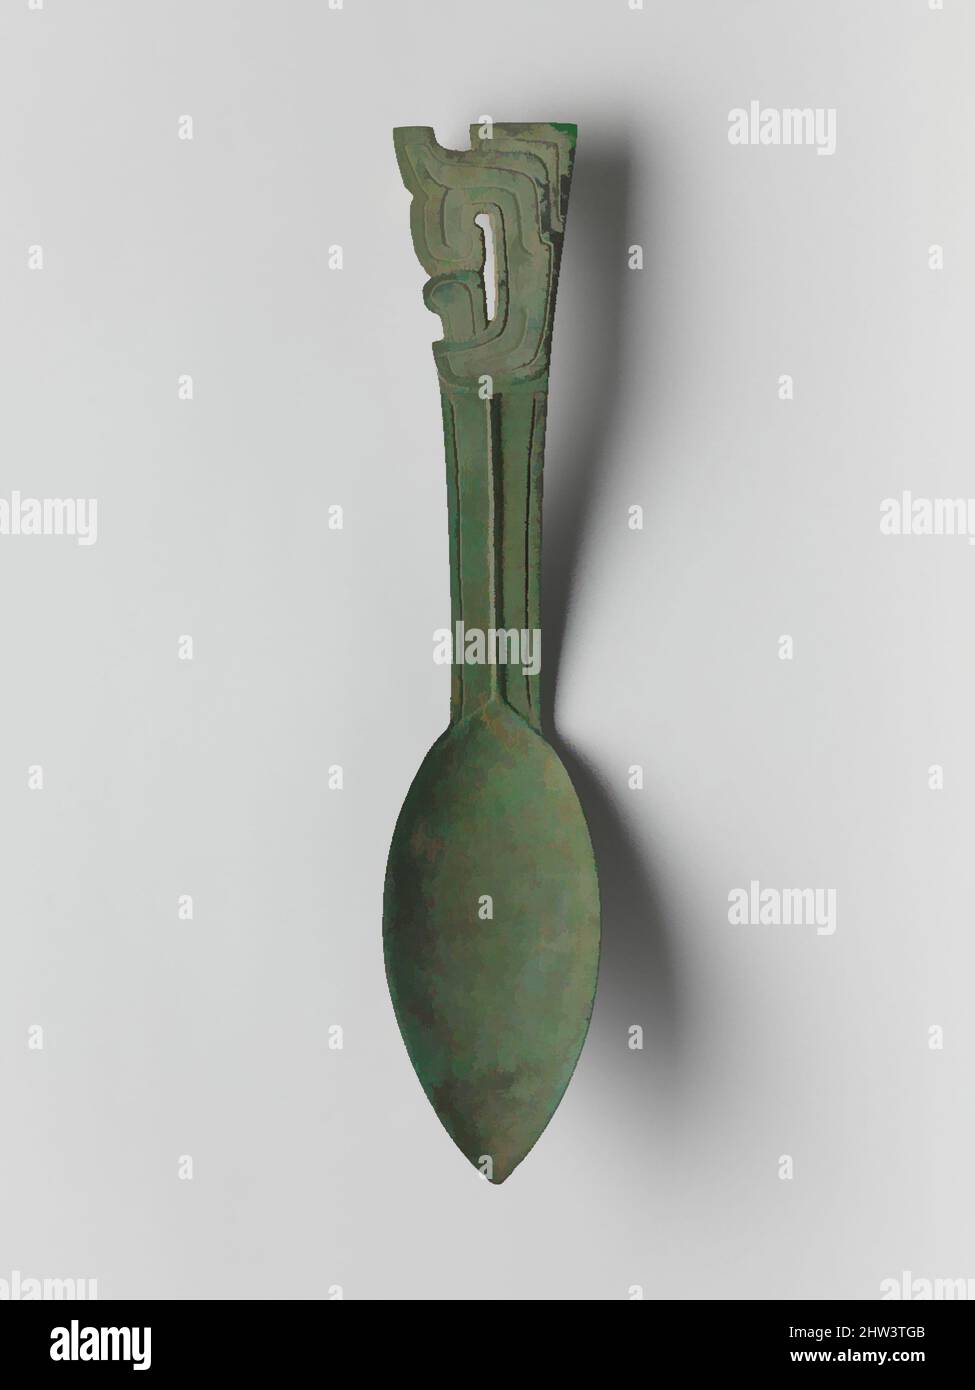 Art inspired by 匕, Ritual Spoon (Bi), mid-Zhou dynasty (1046–256 B.C.), late 9th–early 8th century B.C., China, Bronze, W. 2 1/2 in. (6.4 cm); L. 12 3/4 in. (32.4 cm); Wt. 1 lb. (0.5 kg), Metalwork, Classic works modernized by Artotop with a splash of modernity. Shapes, color and value, eye-catching visual impact on art. Emotions through freedom of artworks in a contemporary way. A timeless message pursuing a wildly creative new direction. Artists turning to the digital medium and creating the Artotop NFT Stock Photo